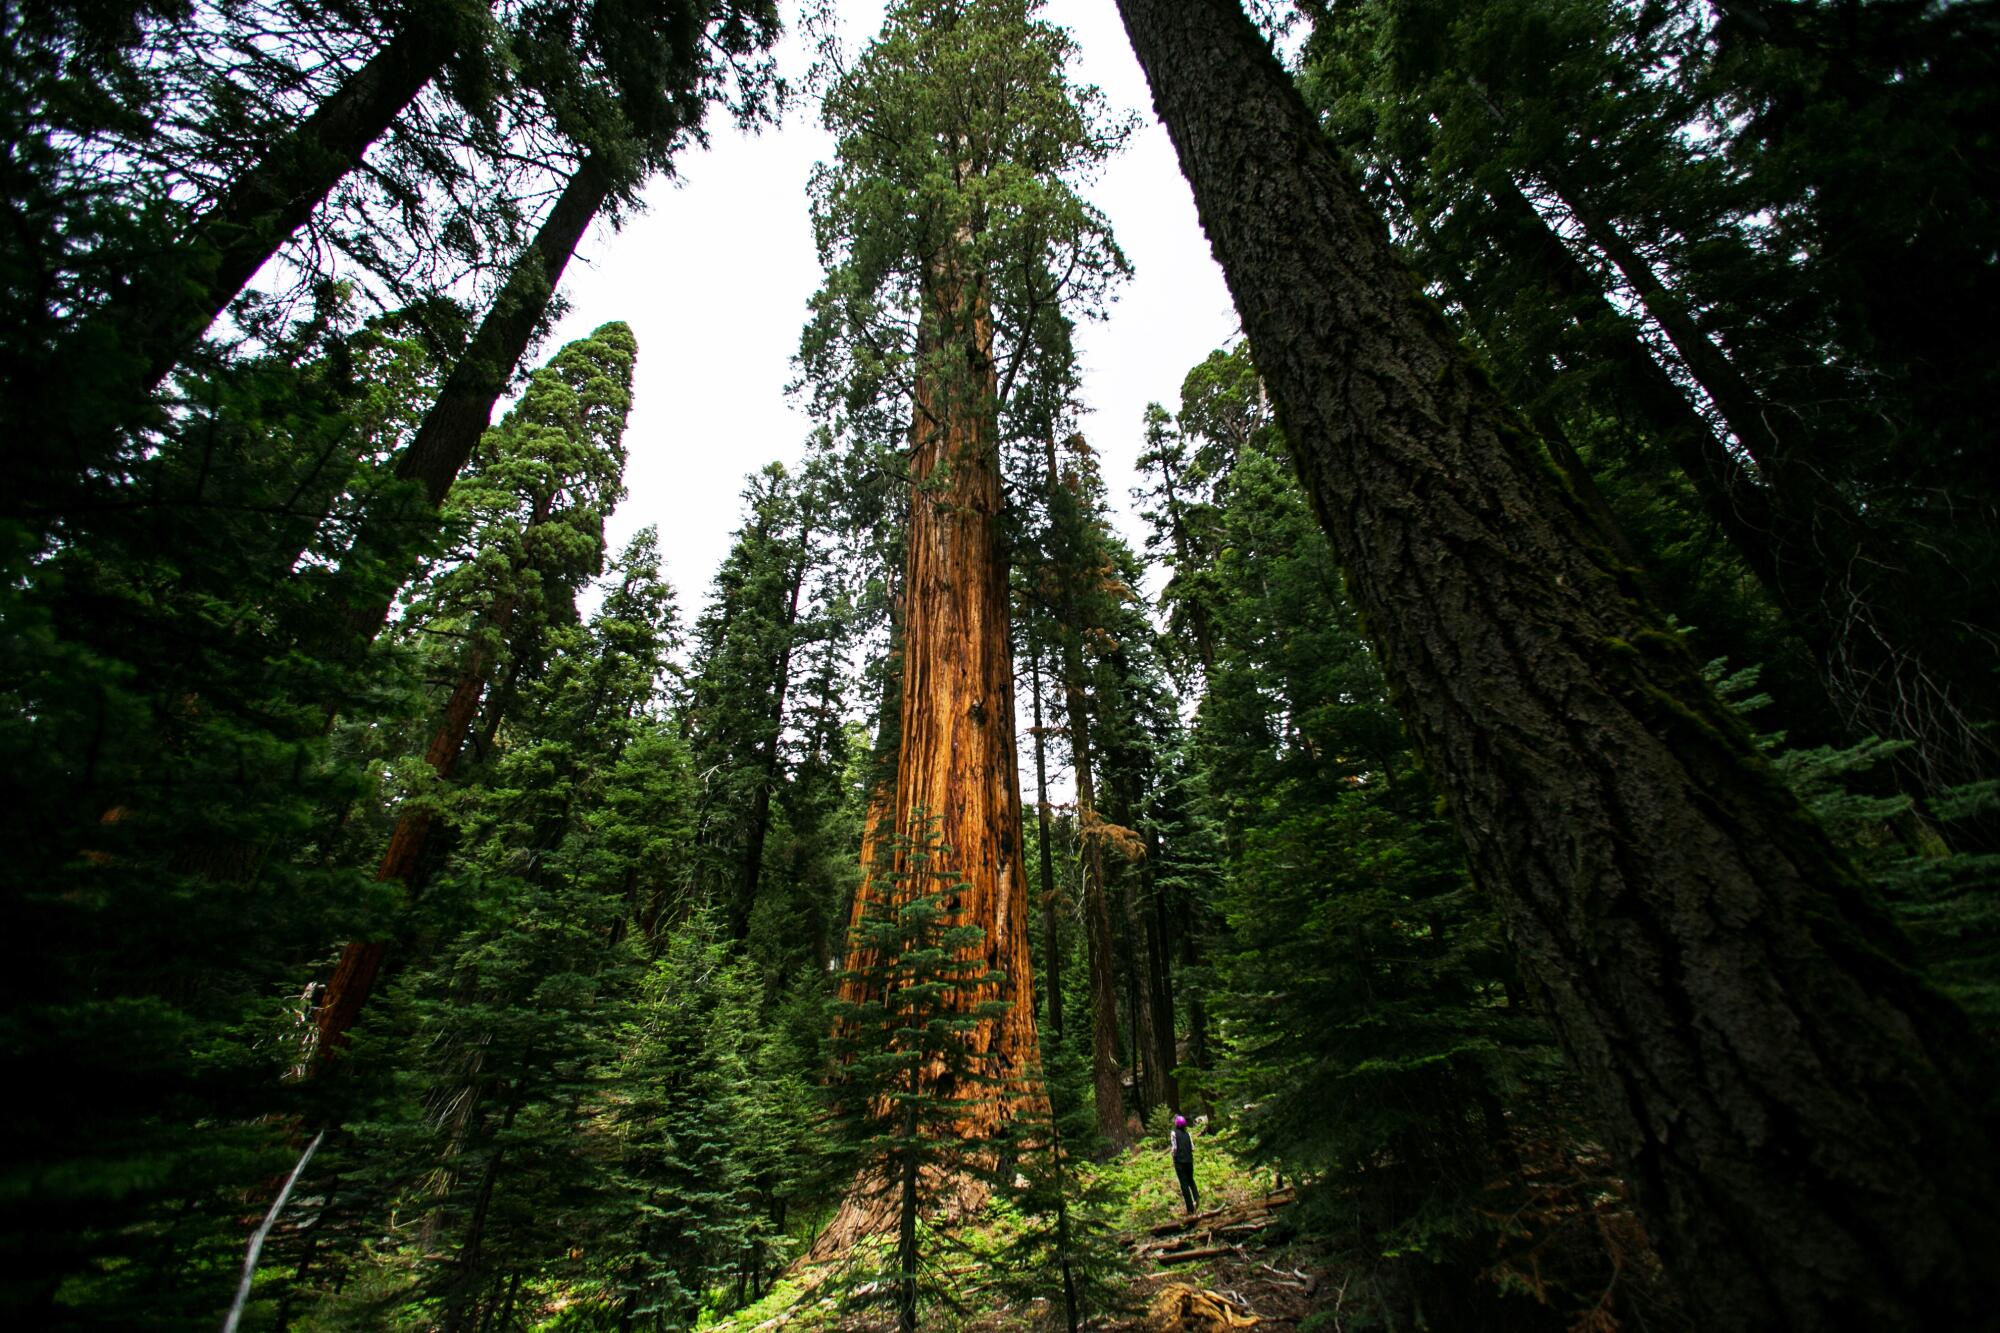 A giant sequoia tree in a grove